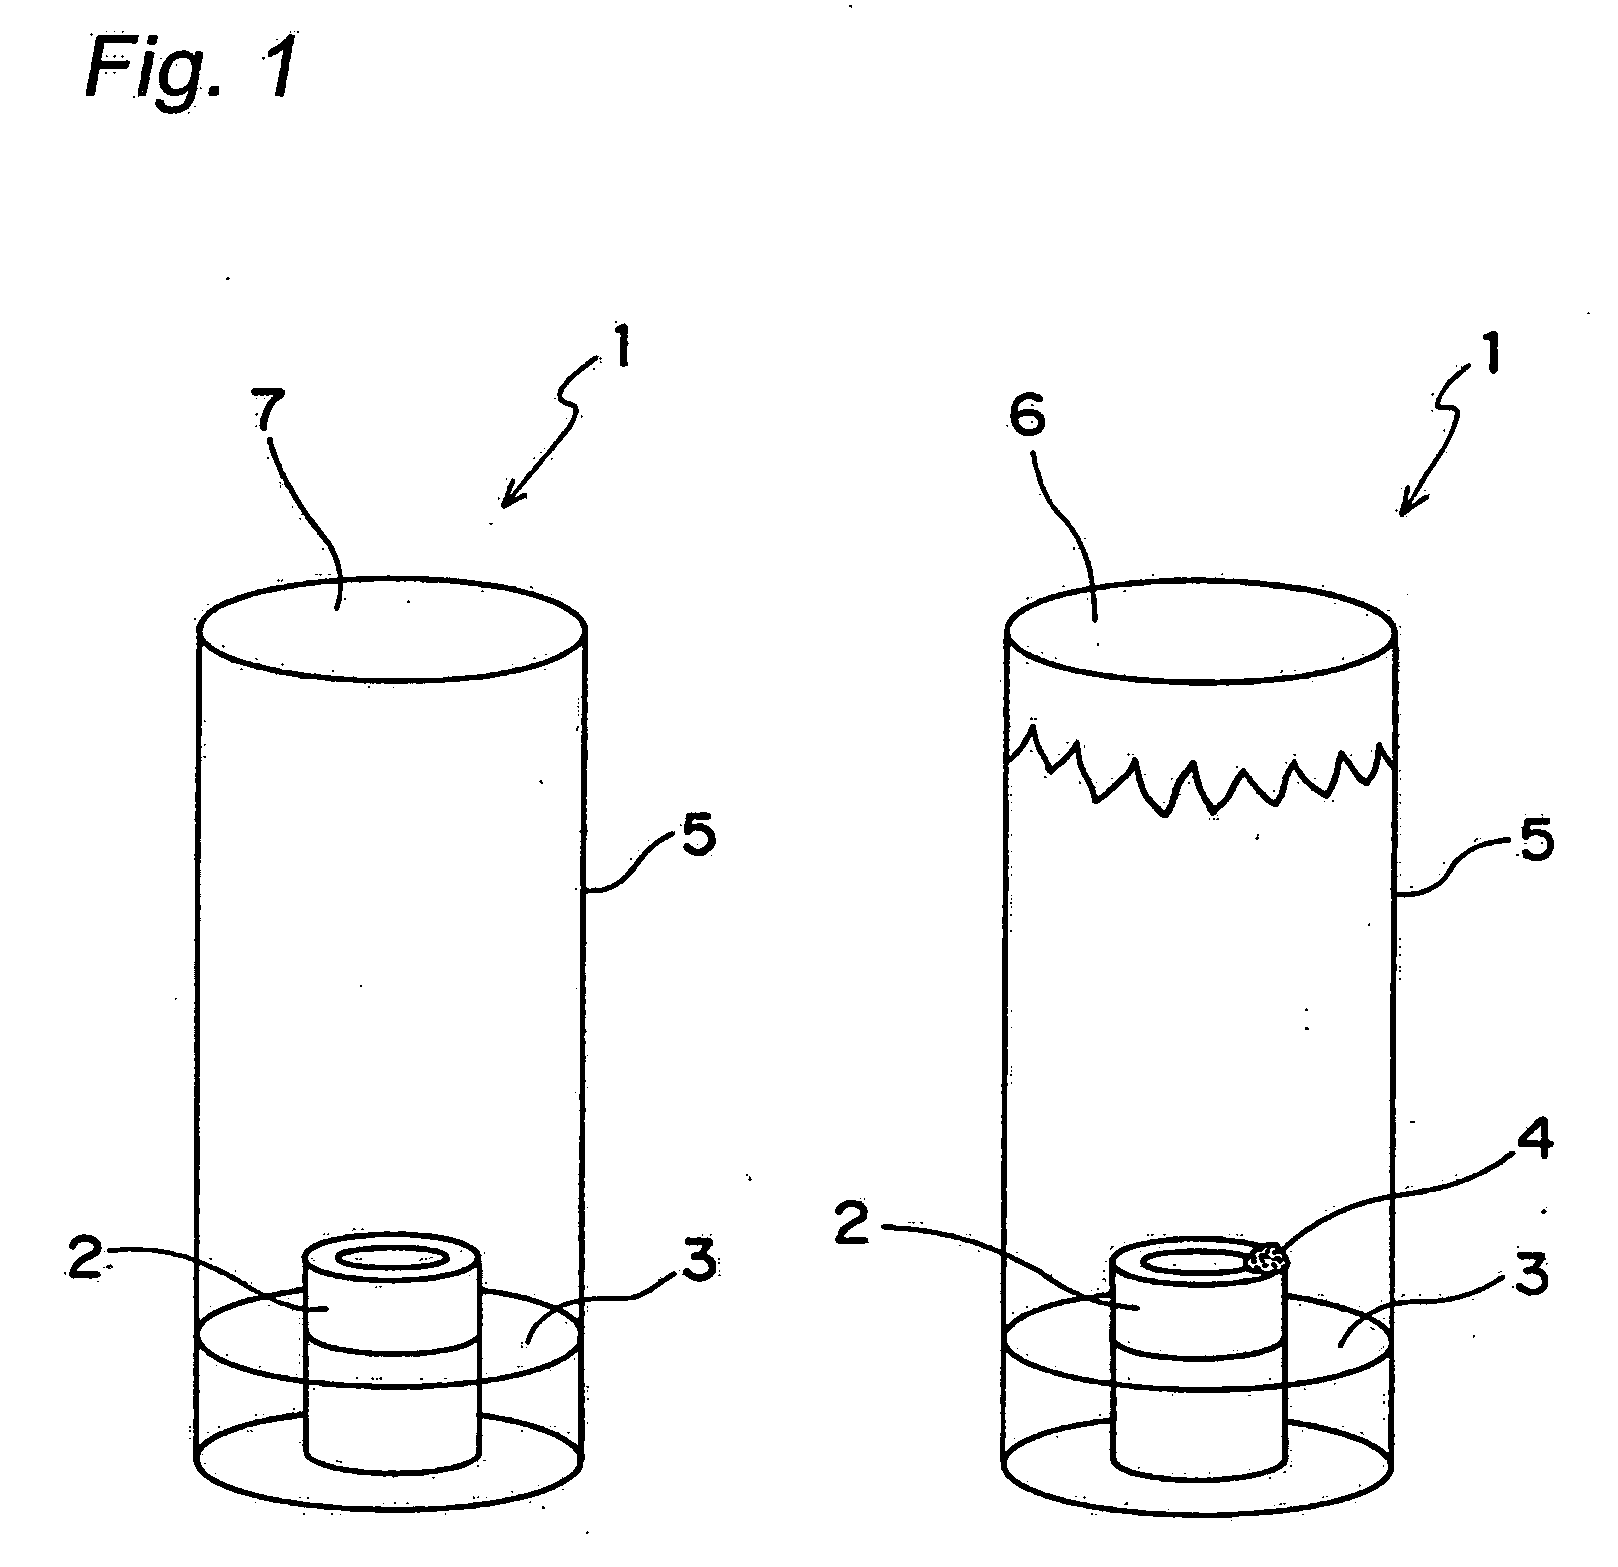 Apparatus for culturing organism and method of culturing organism